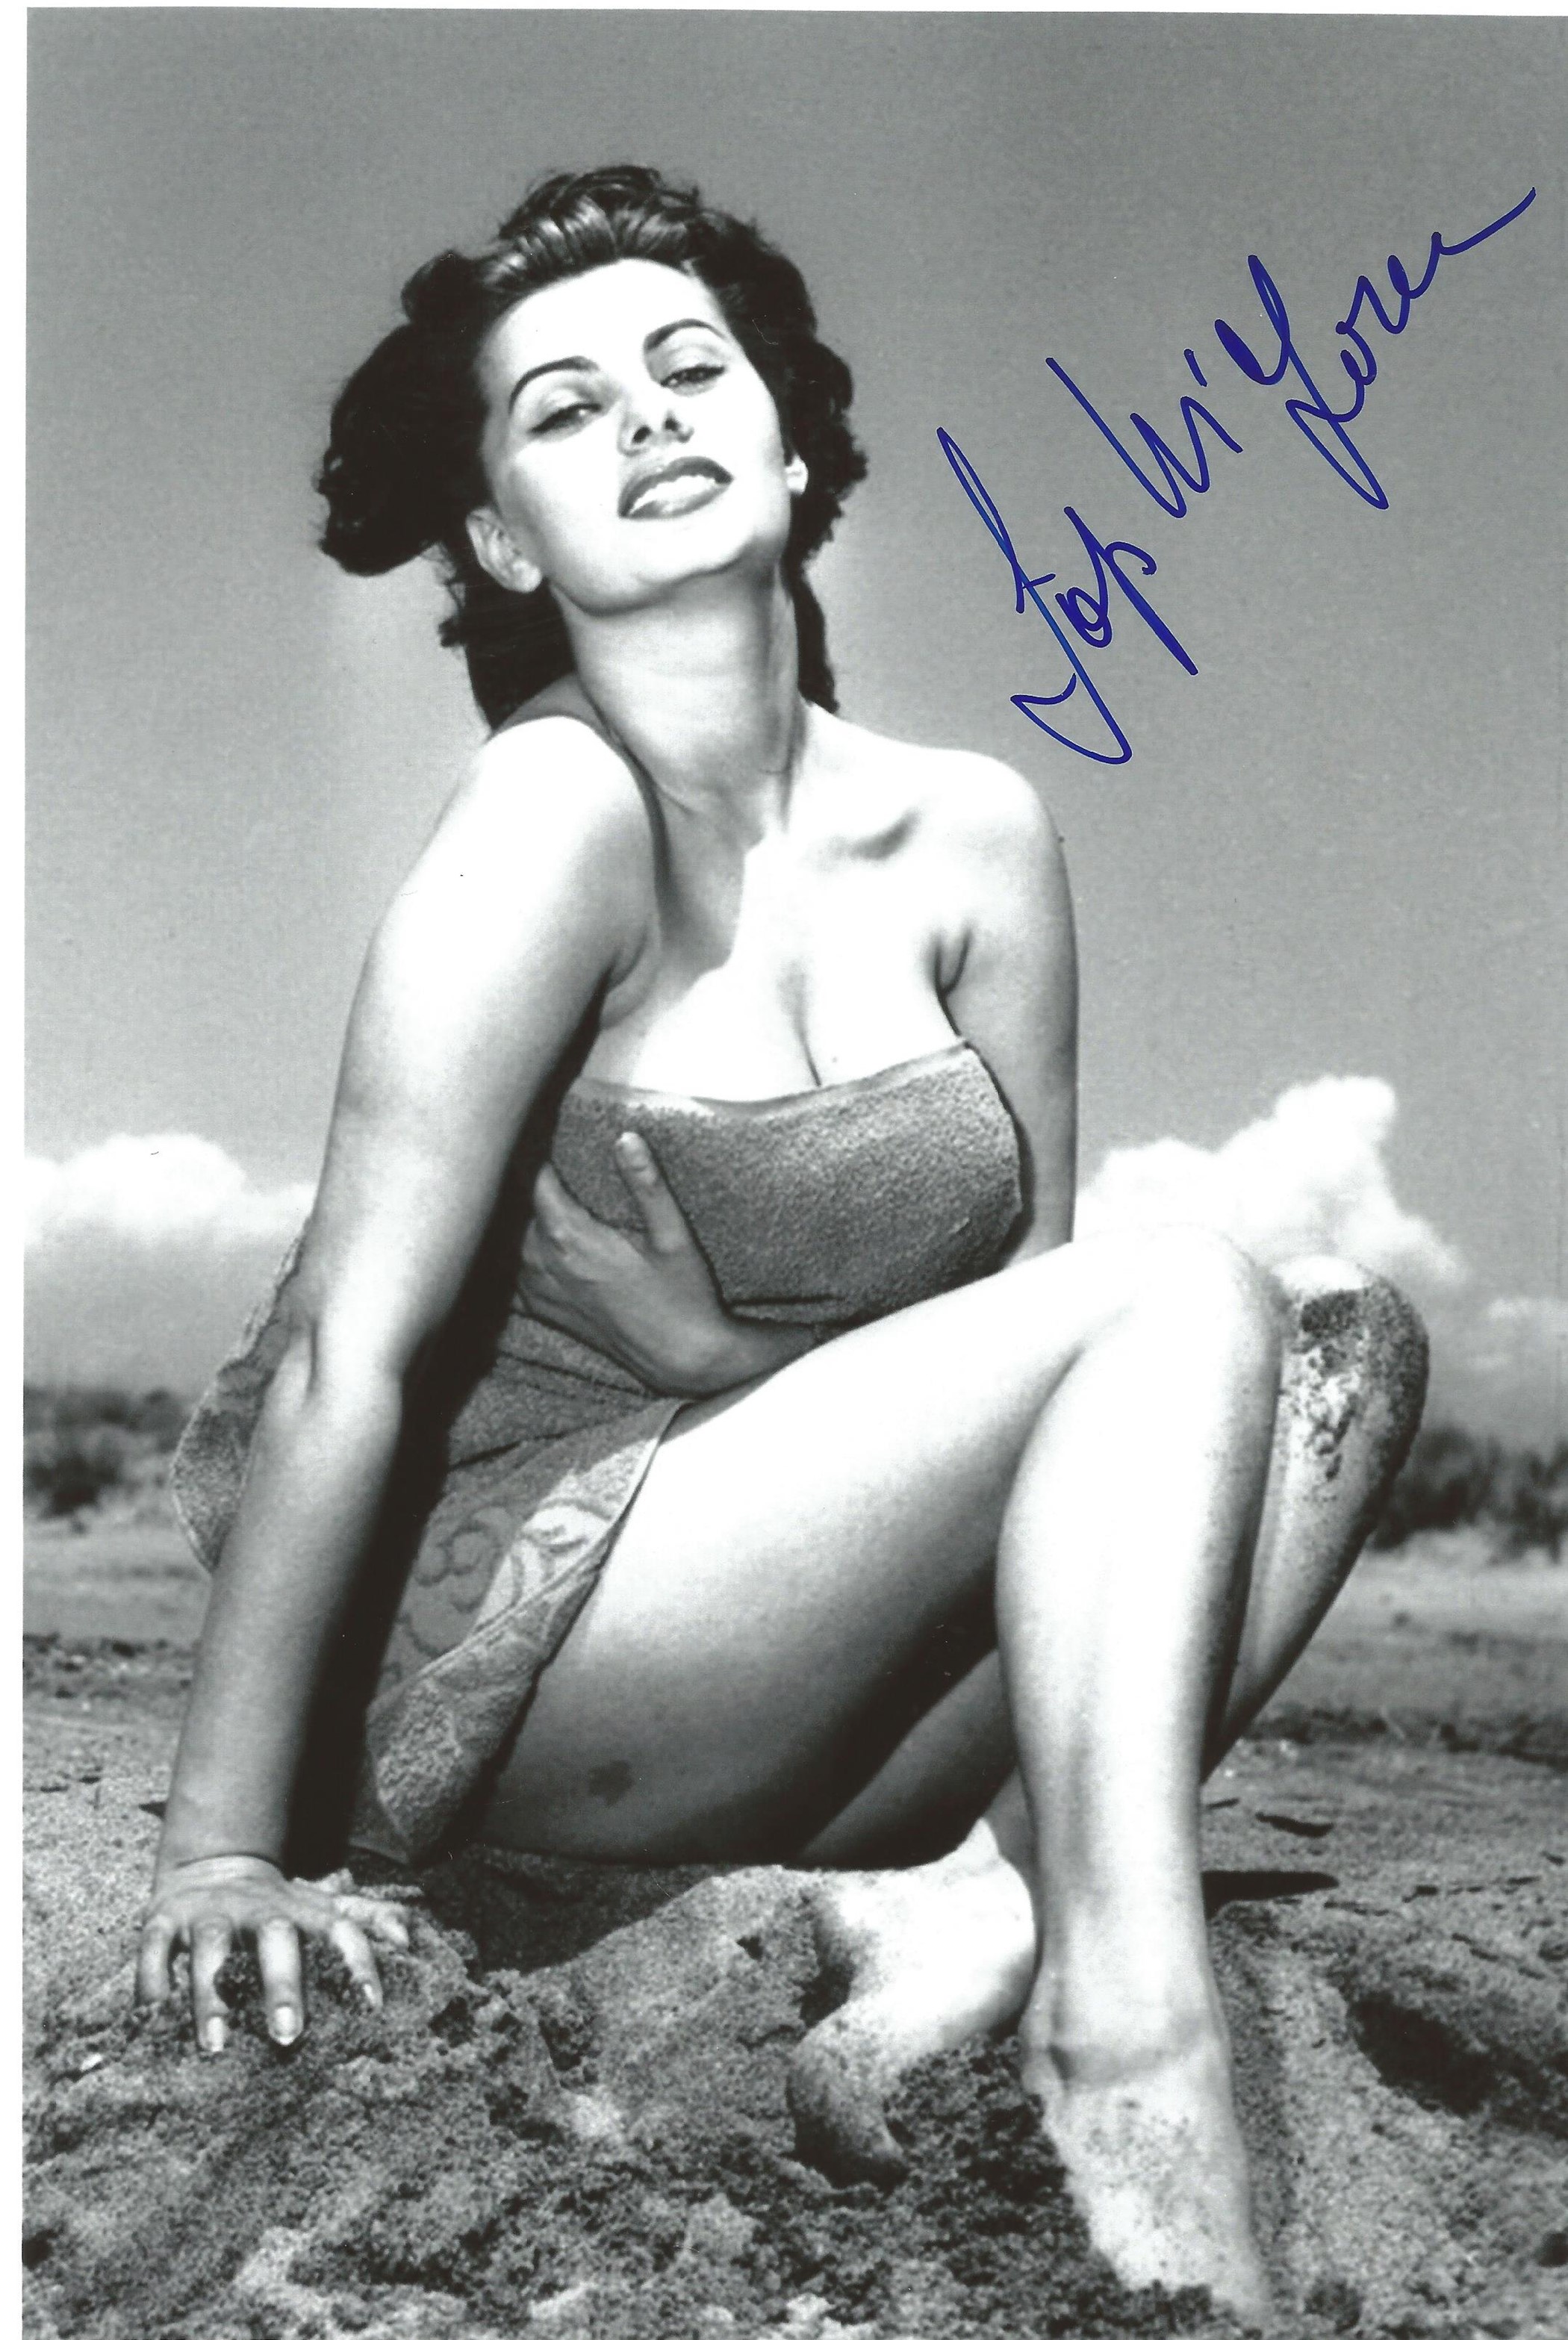 Sophia Loren, signed 12x8 black and white photograph Loren is an Italian actress who was named by